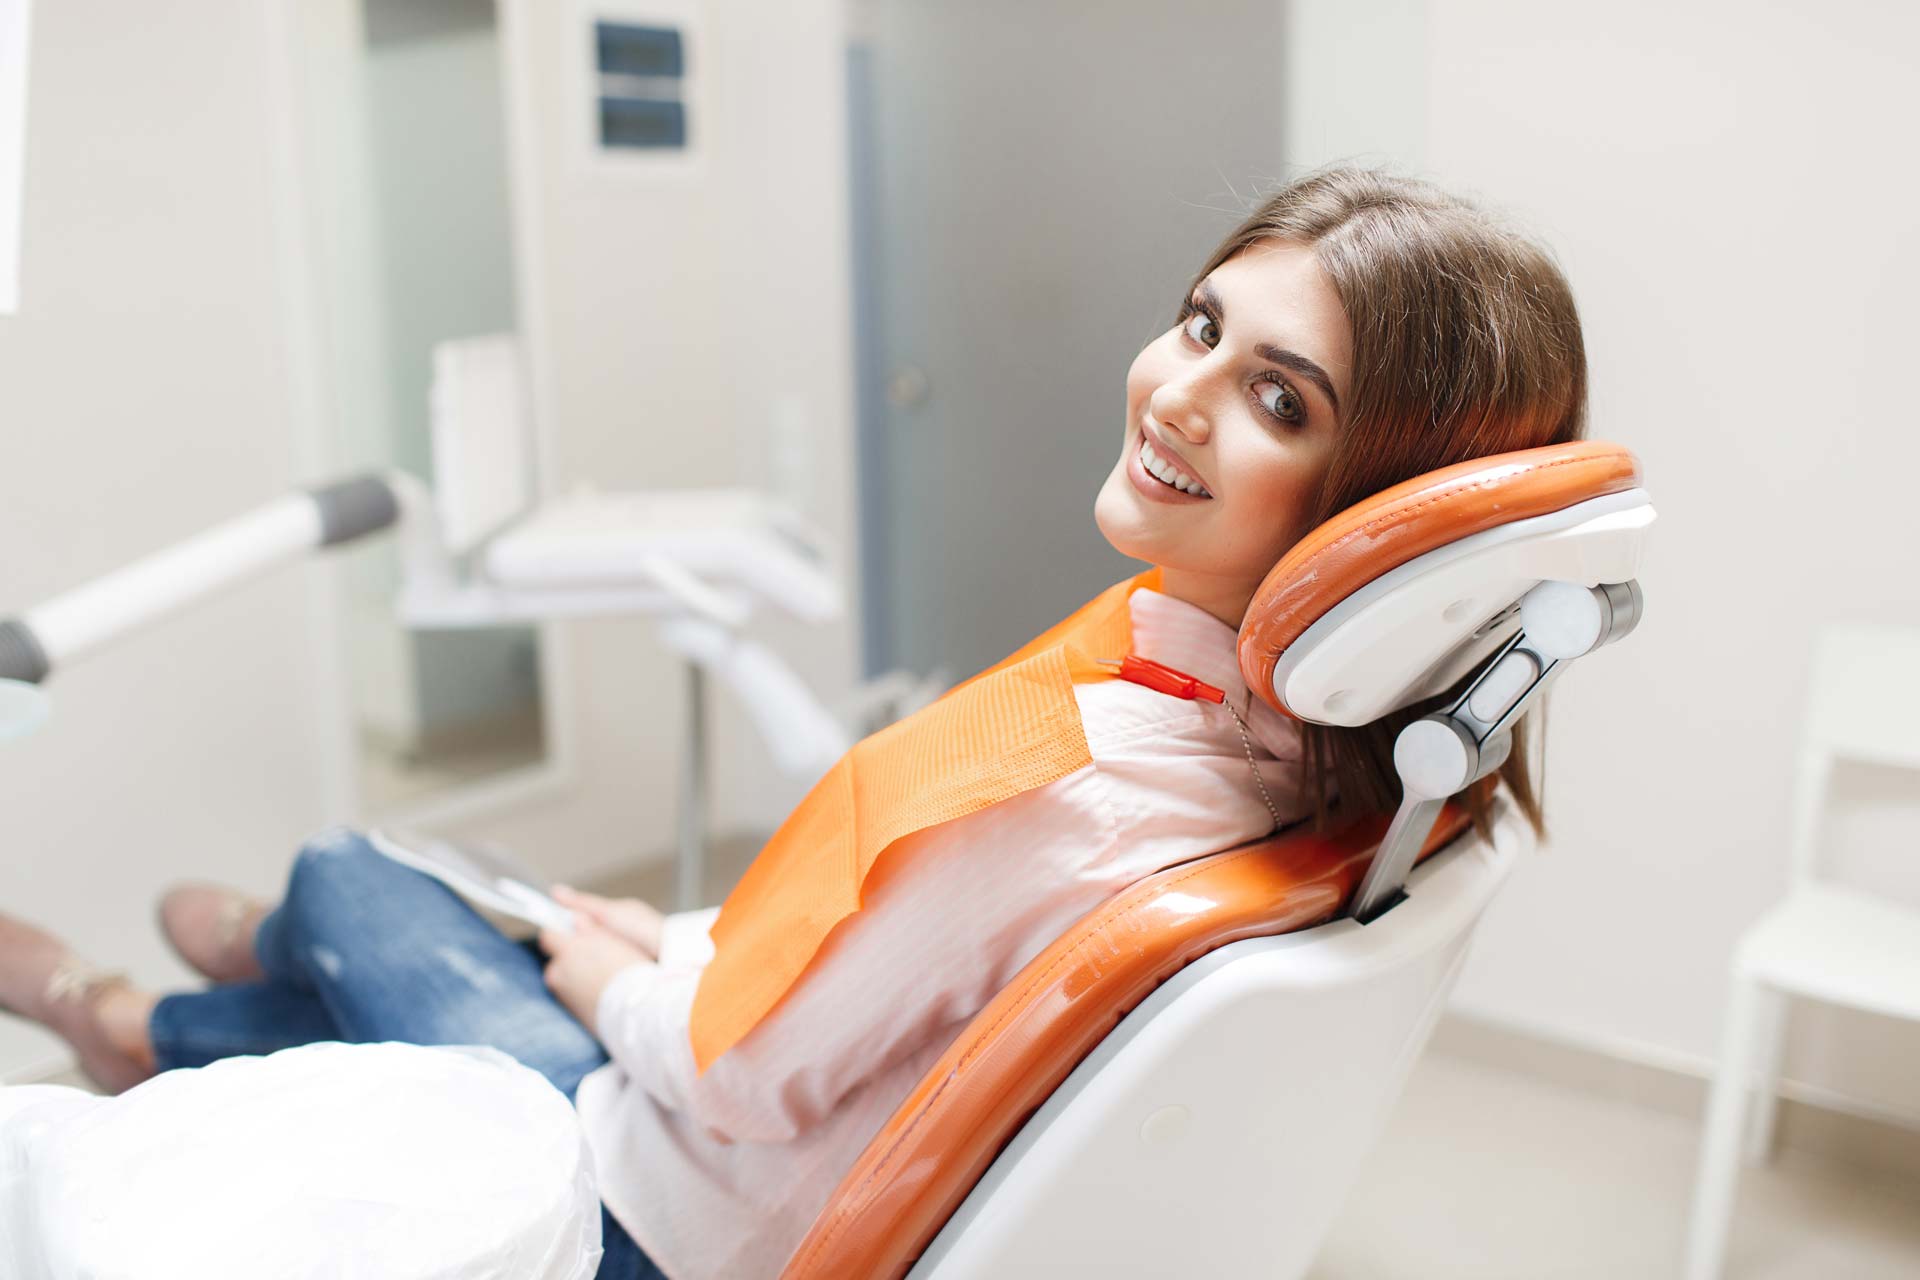 a patient smiling in a dentist chair